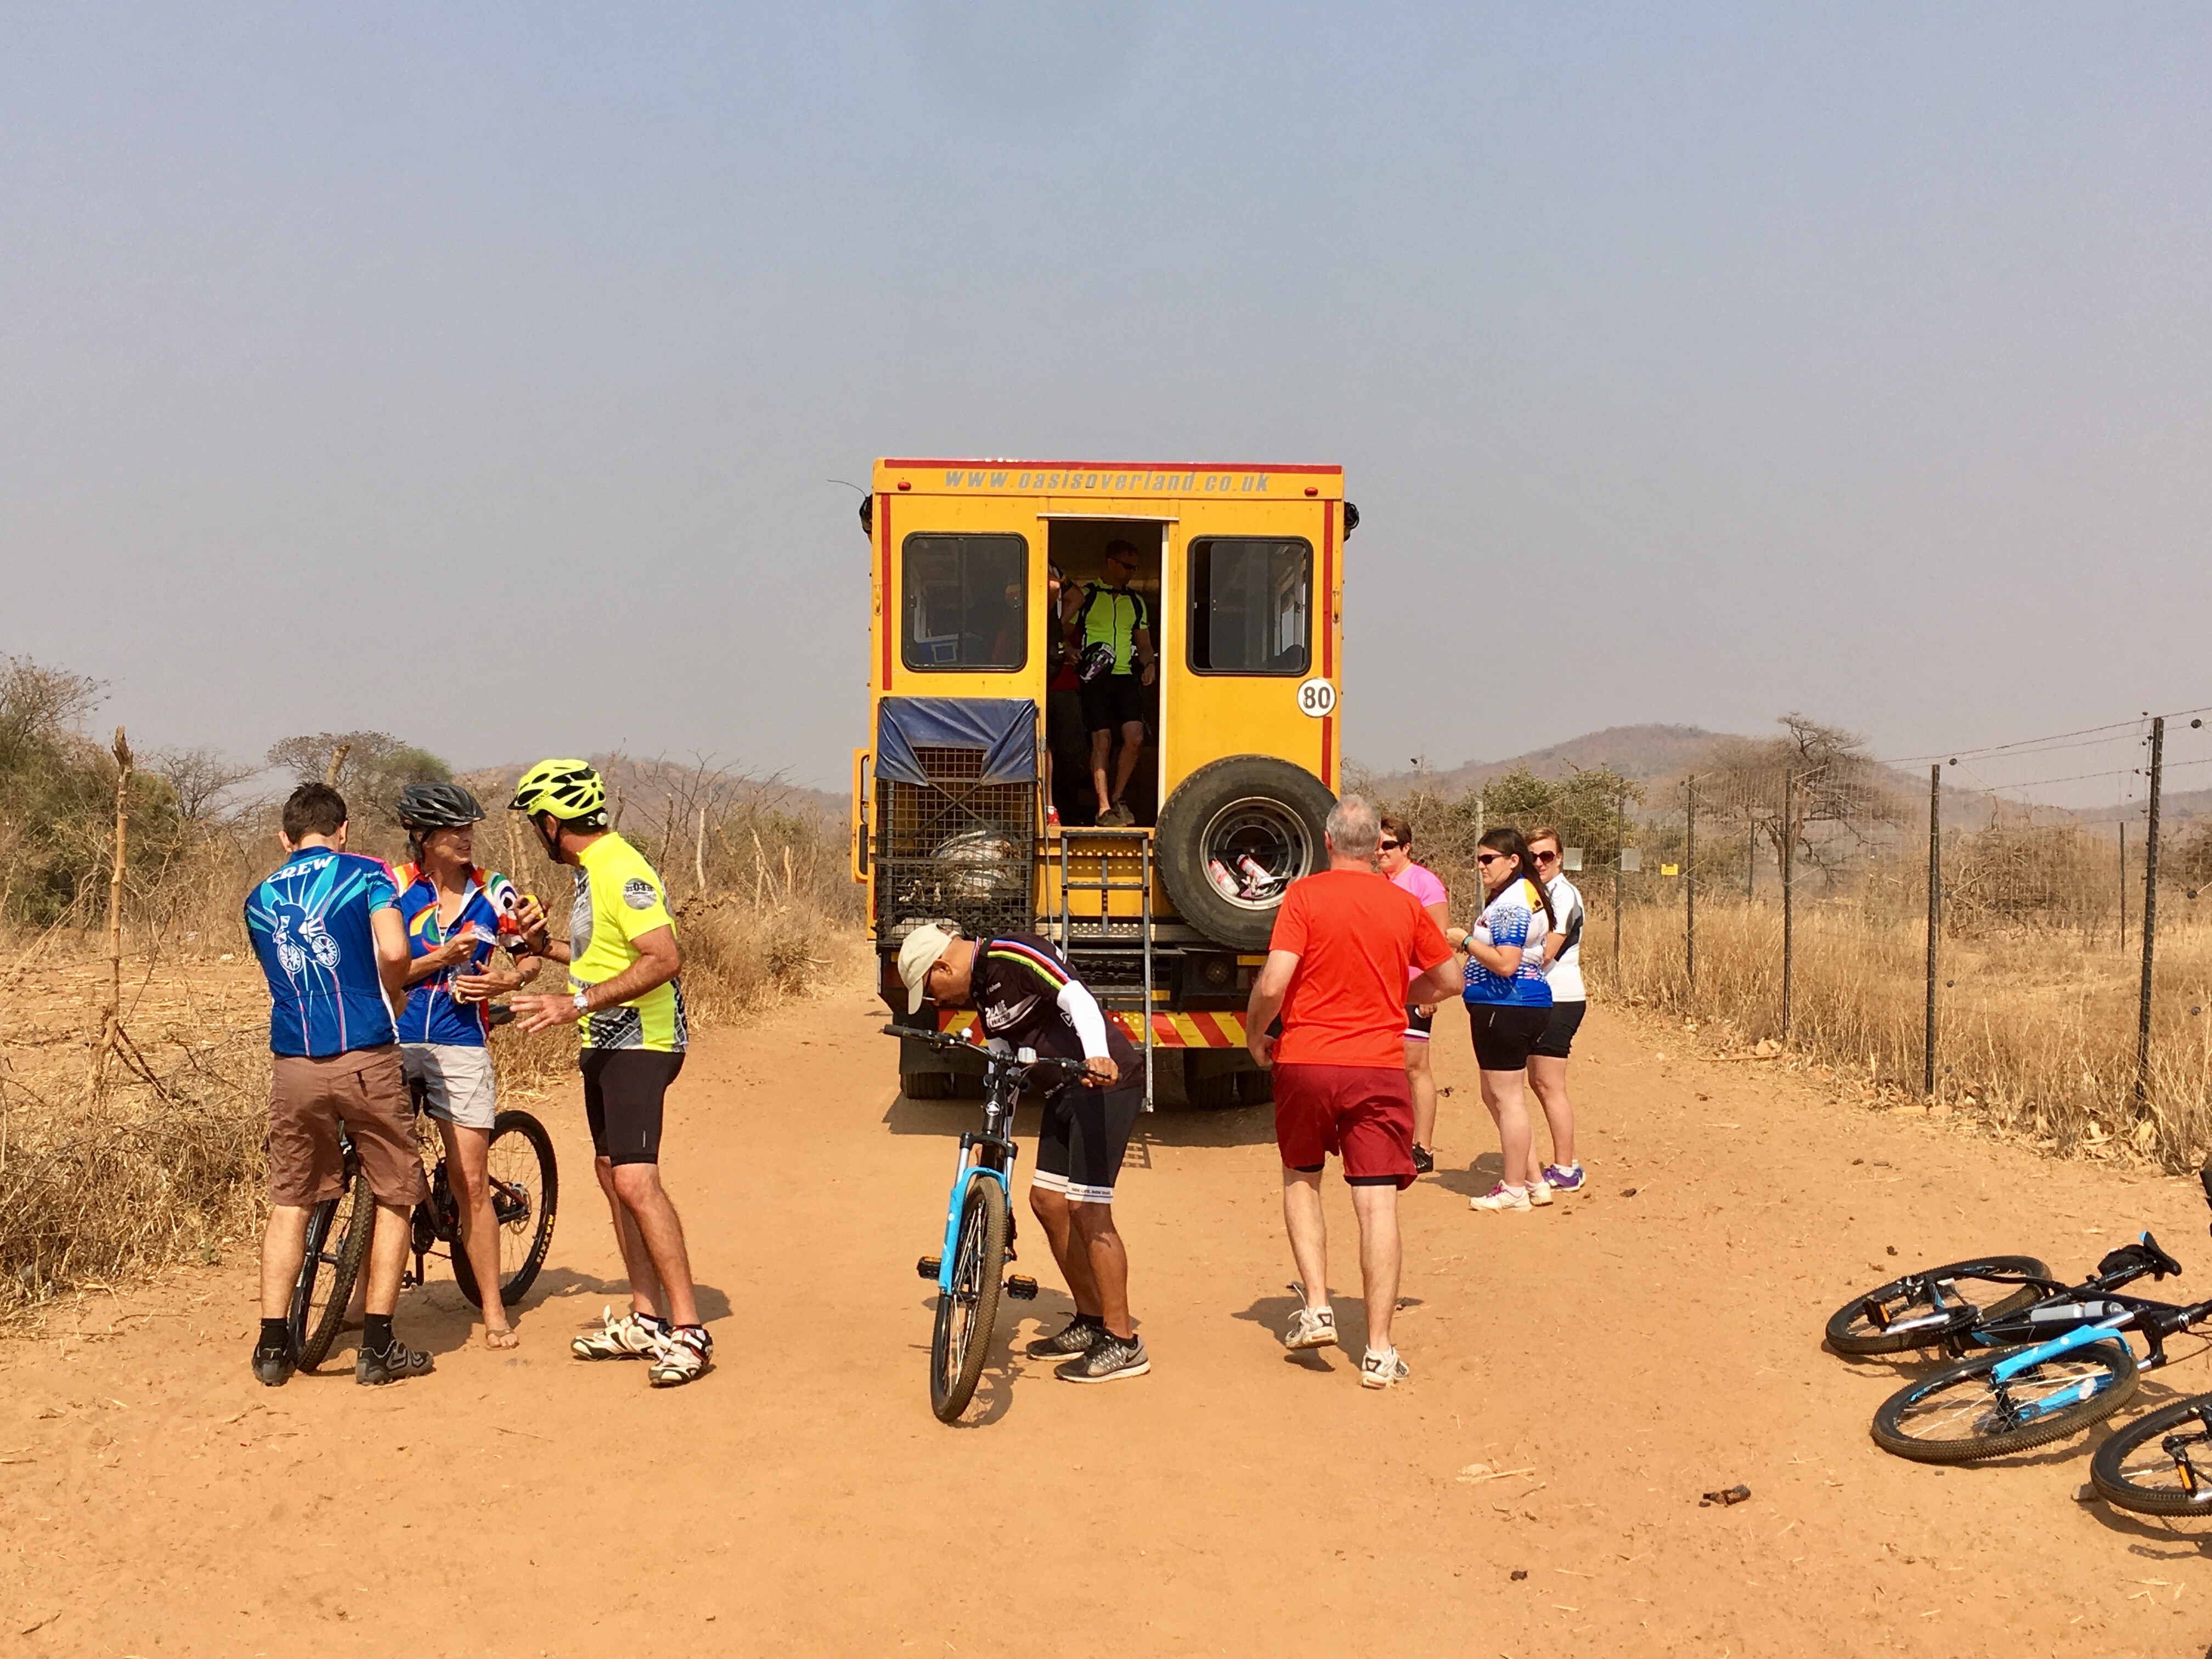 We also adapt one of our trucks to carry bikes for some trips in Zambia